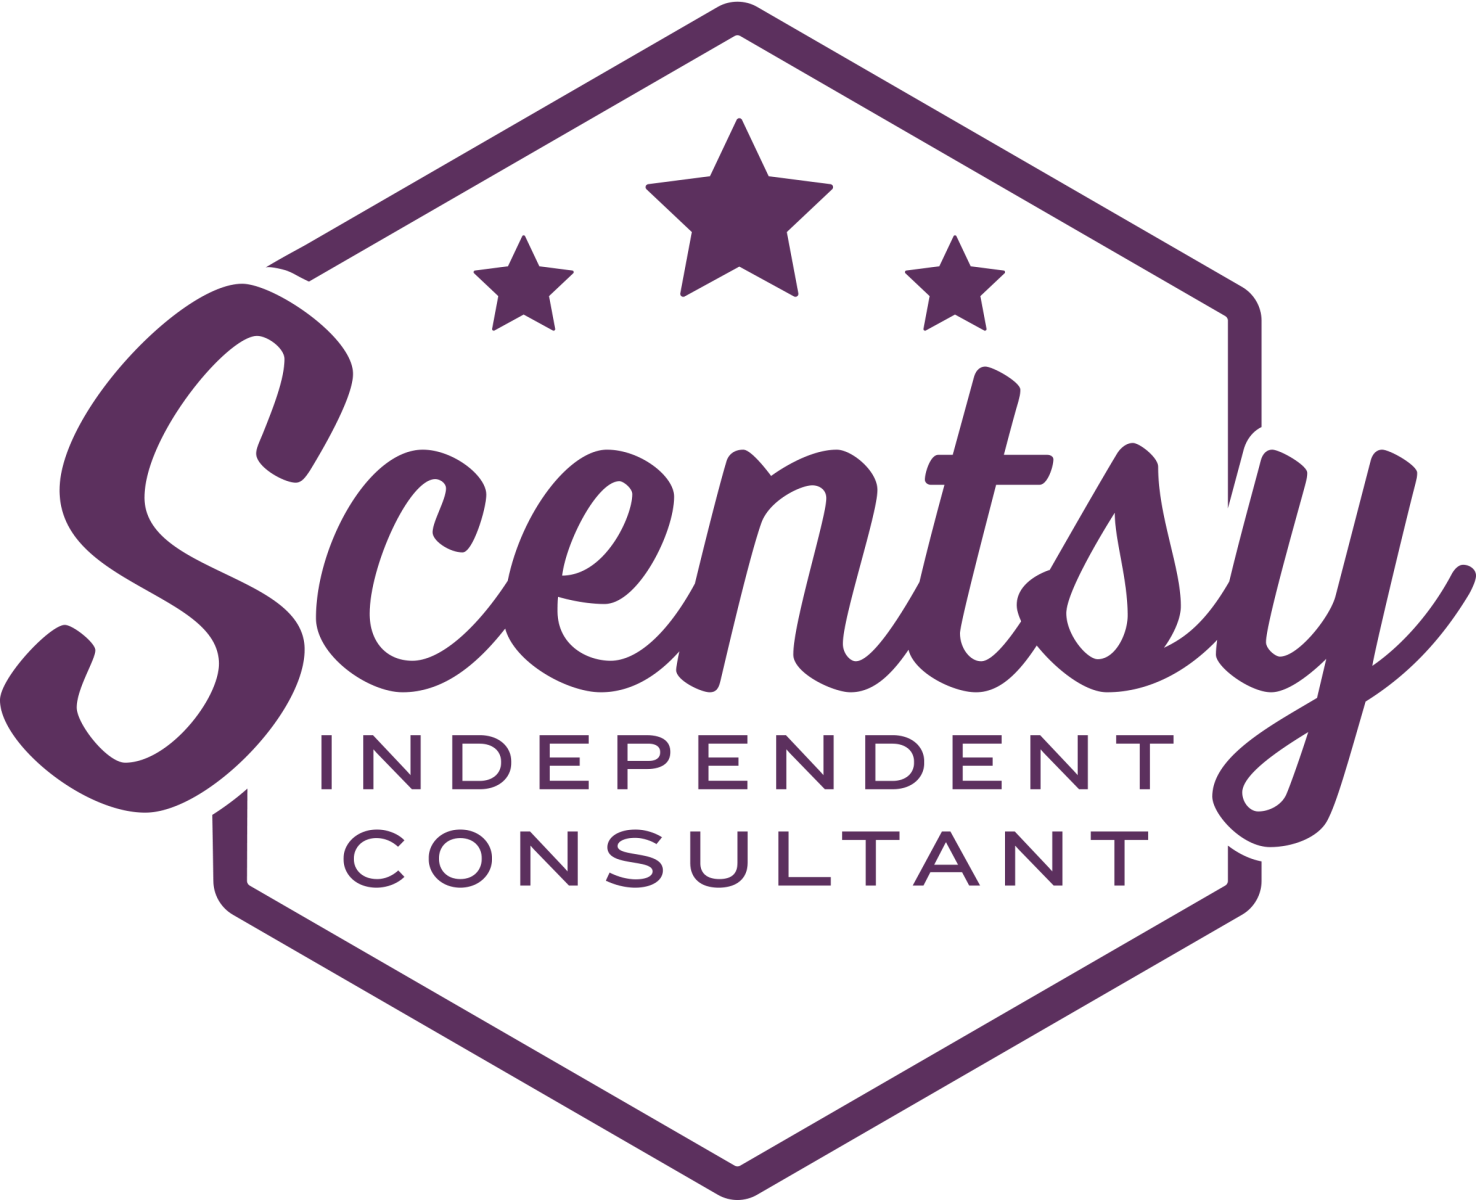 Scentsy Png